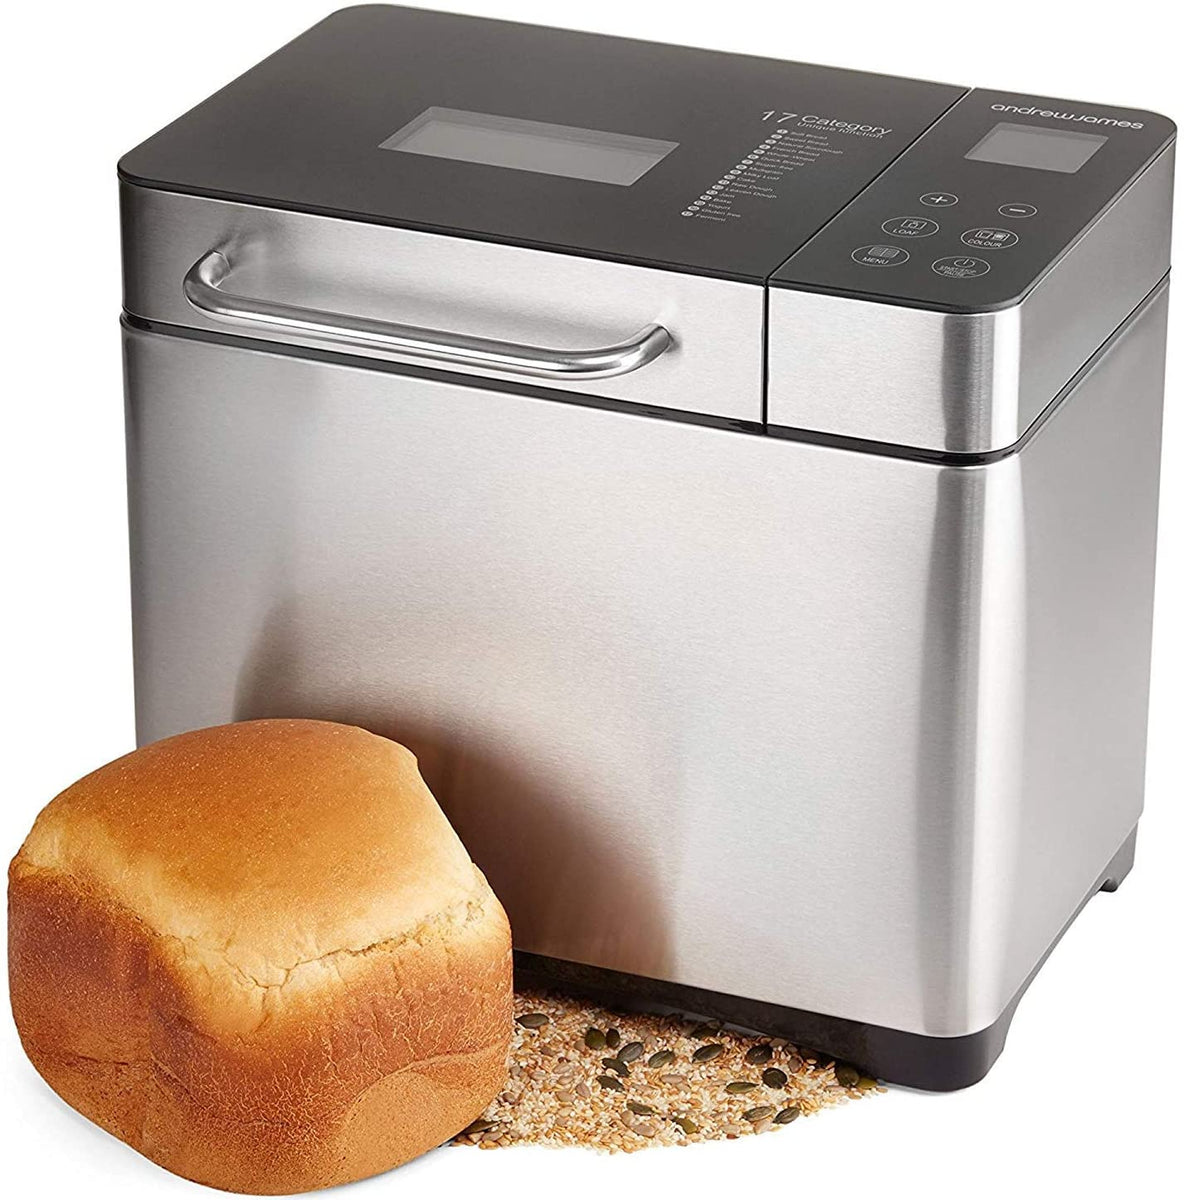 SUPER DEAL Upgraded Breadmaker Full Automatic Stainless Steel Programmable Bread Maker 3 Crust Color PRO LCD Display Upgraded Stainless Steel 15 Hours Delay Time 19 Baking Functions 